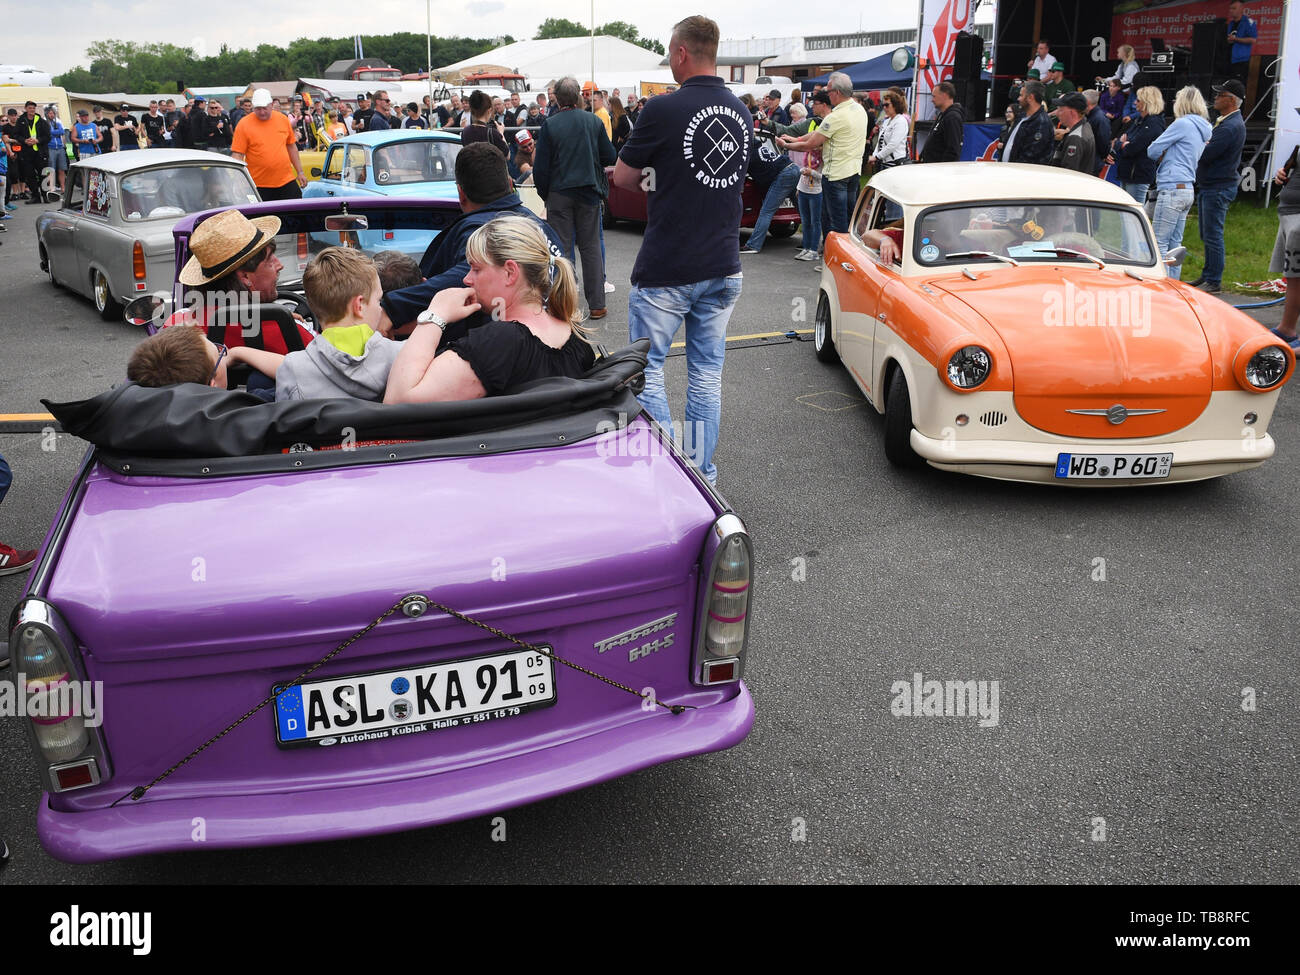 Trabant 500 High Resolution Stock Photography and Images - Alamy